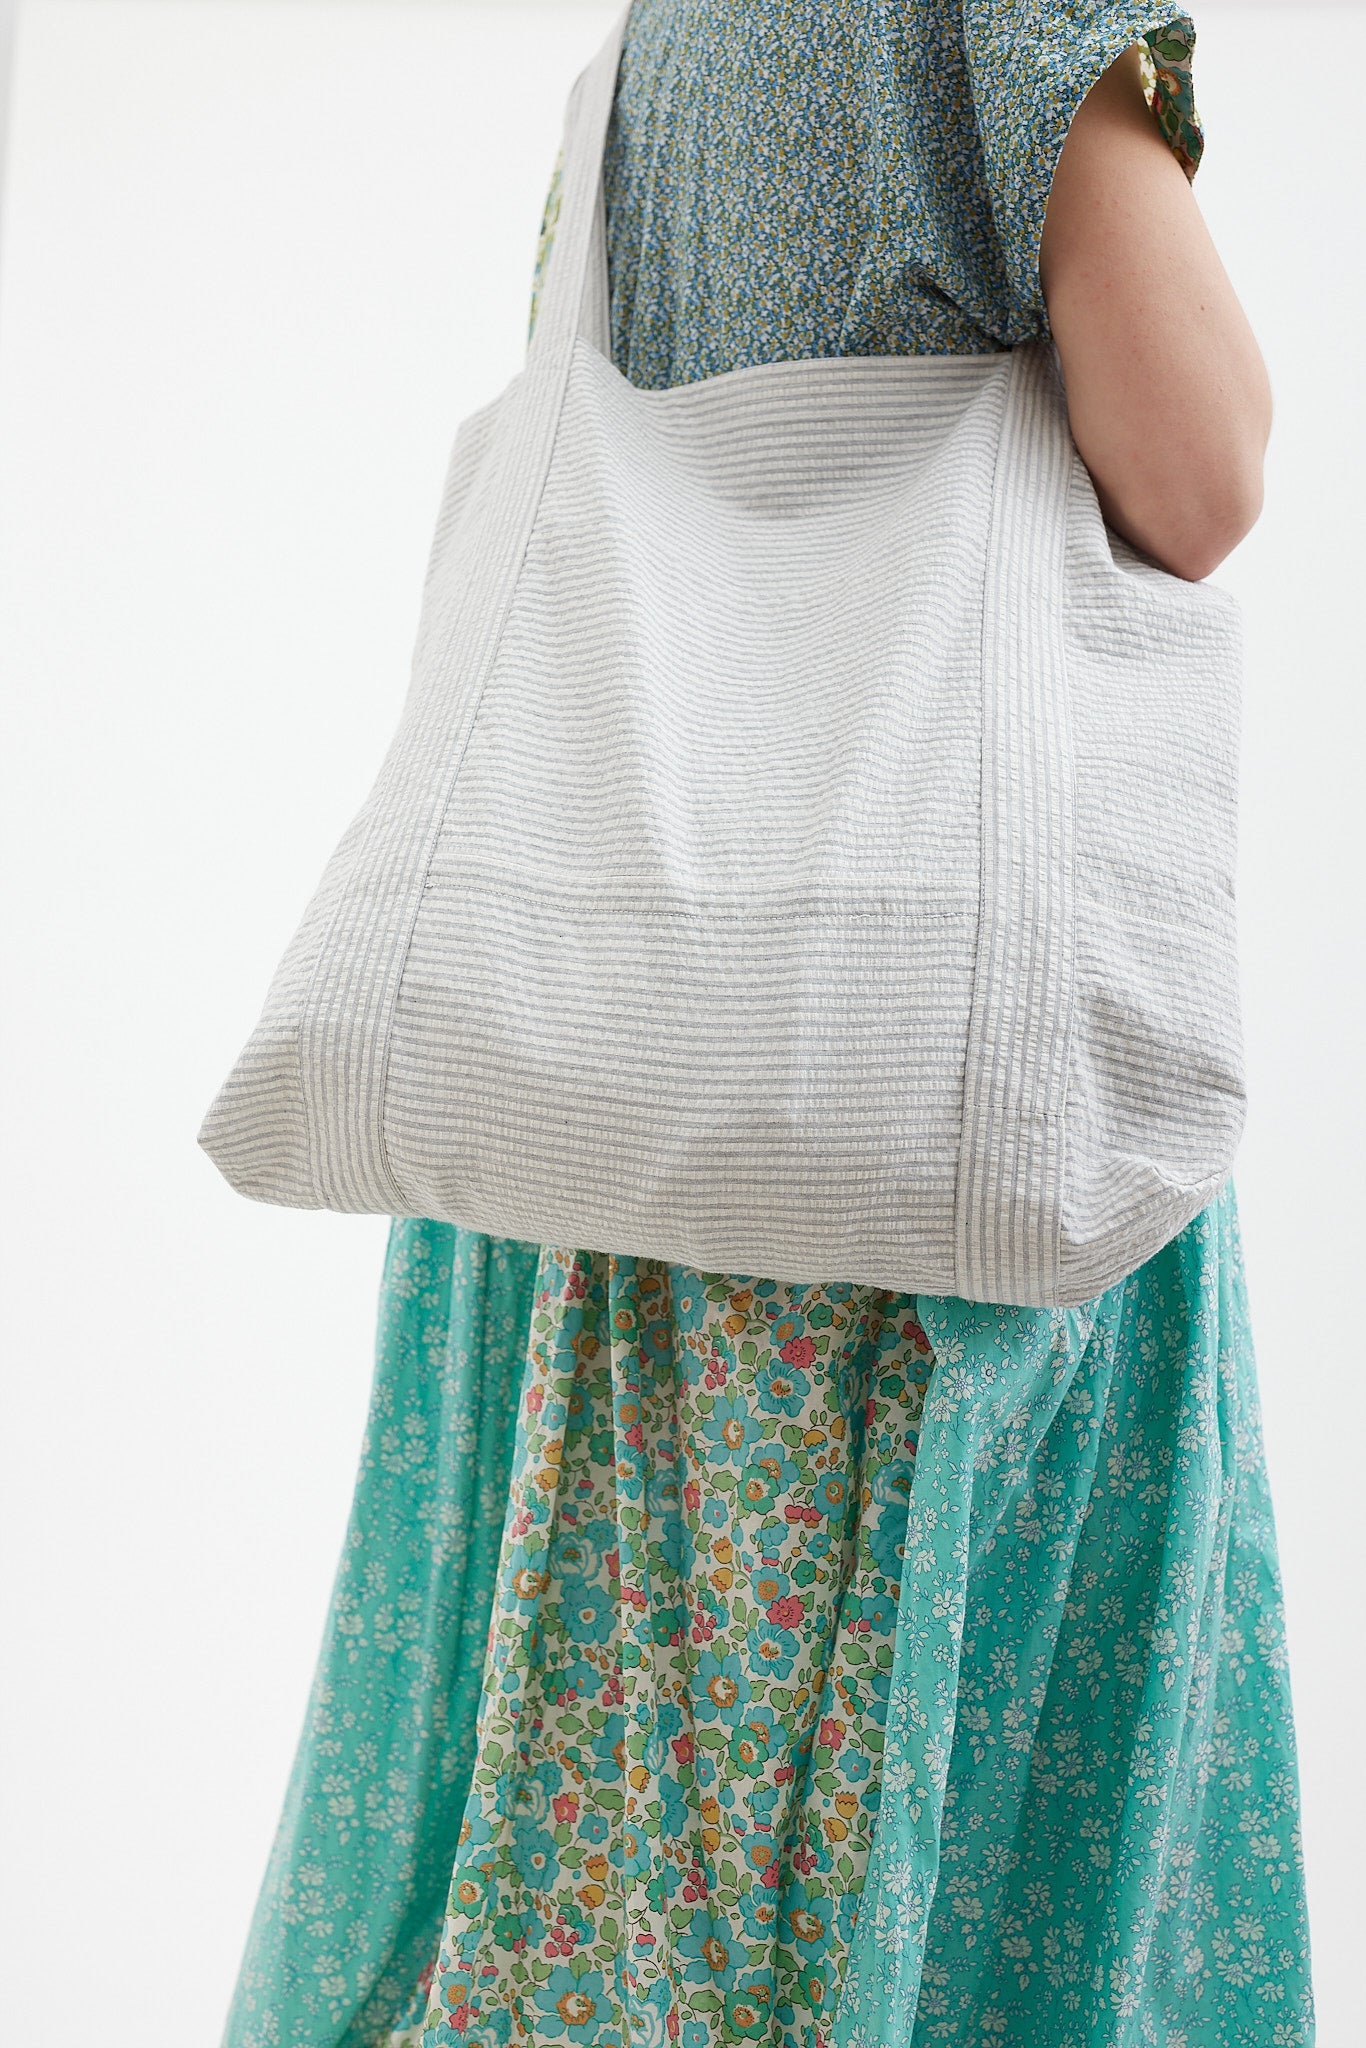 Metta Mills Tote - Japanese Cotton - Melbourne Made